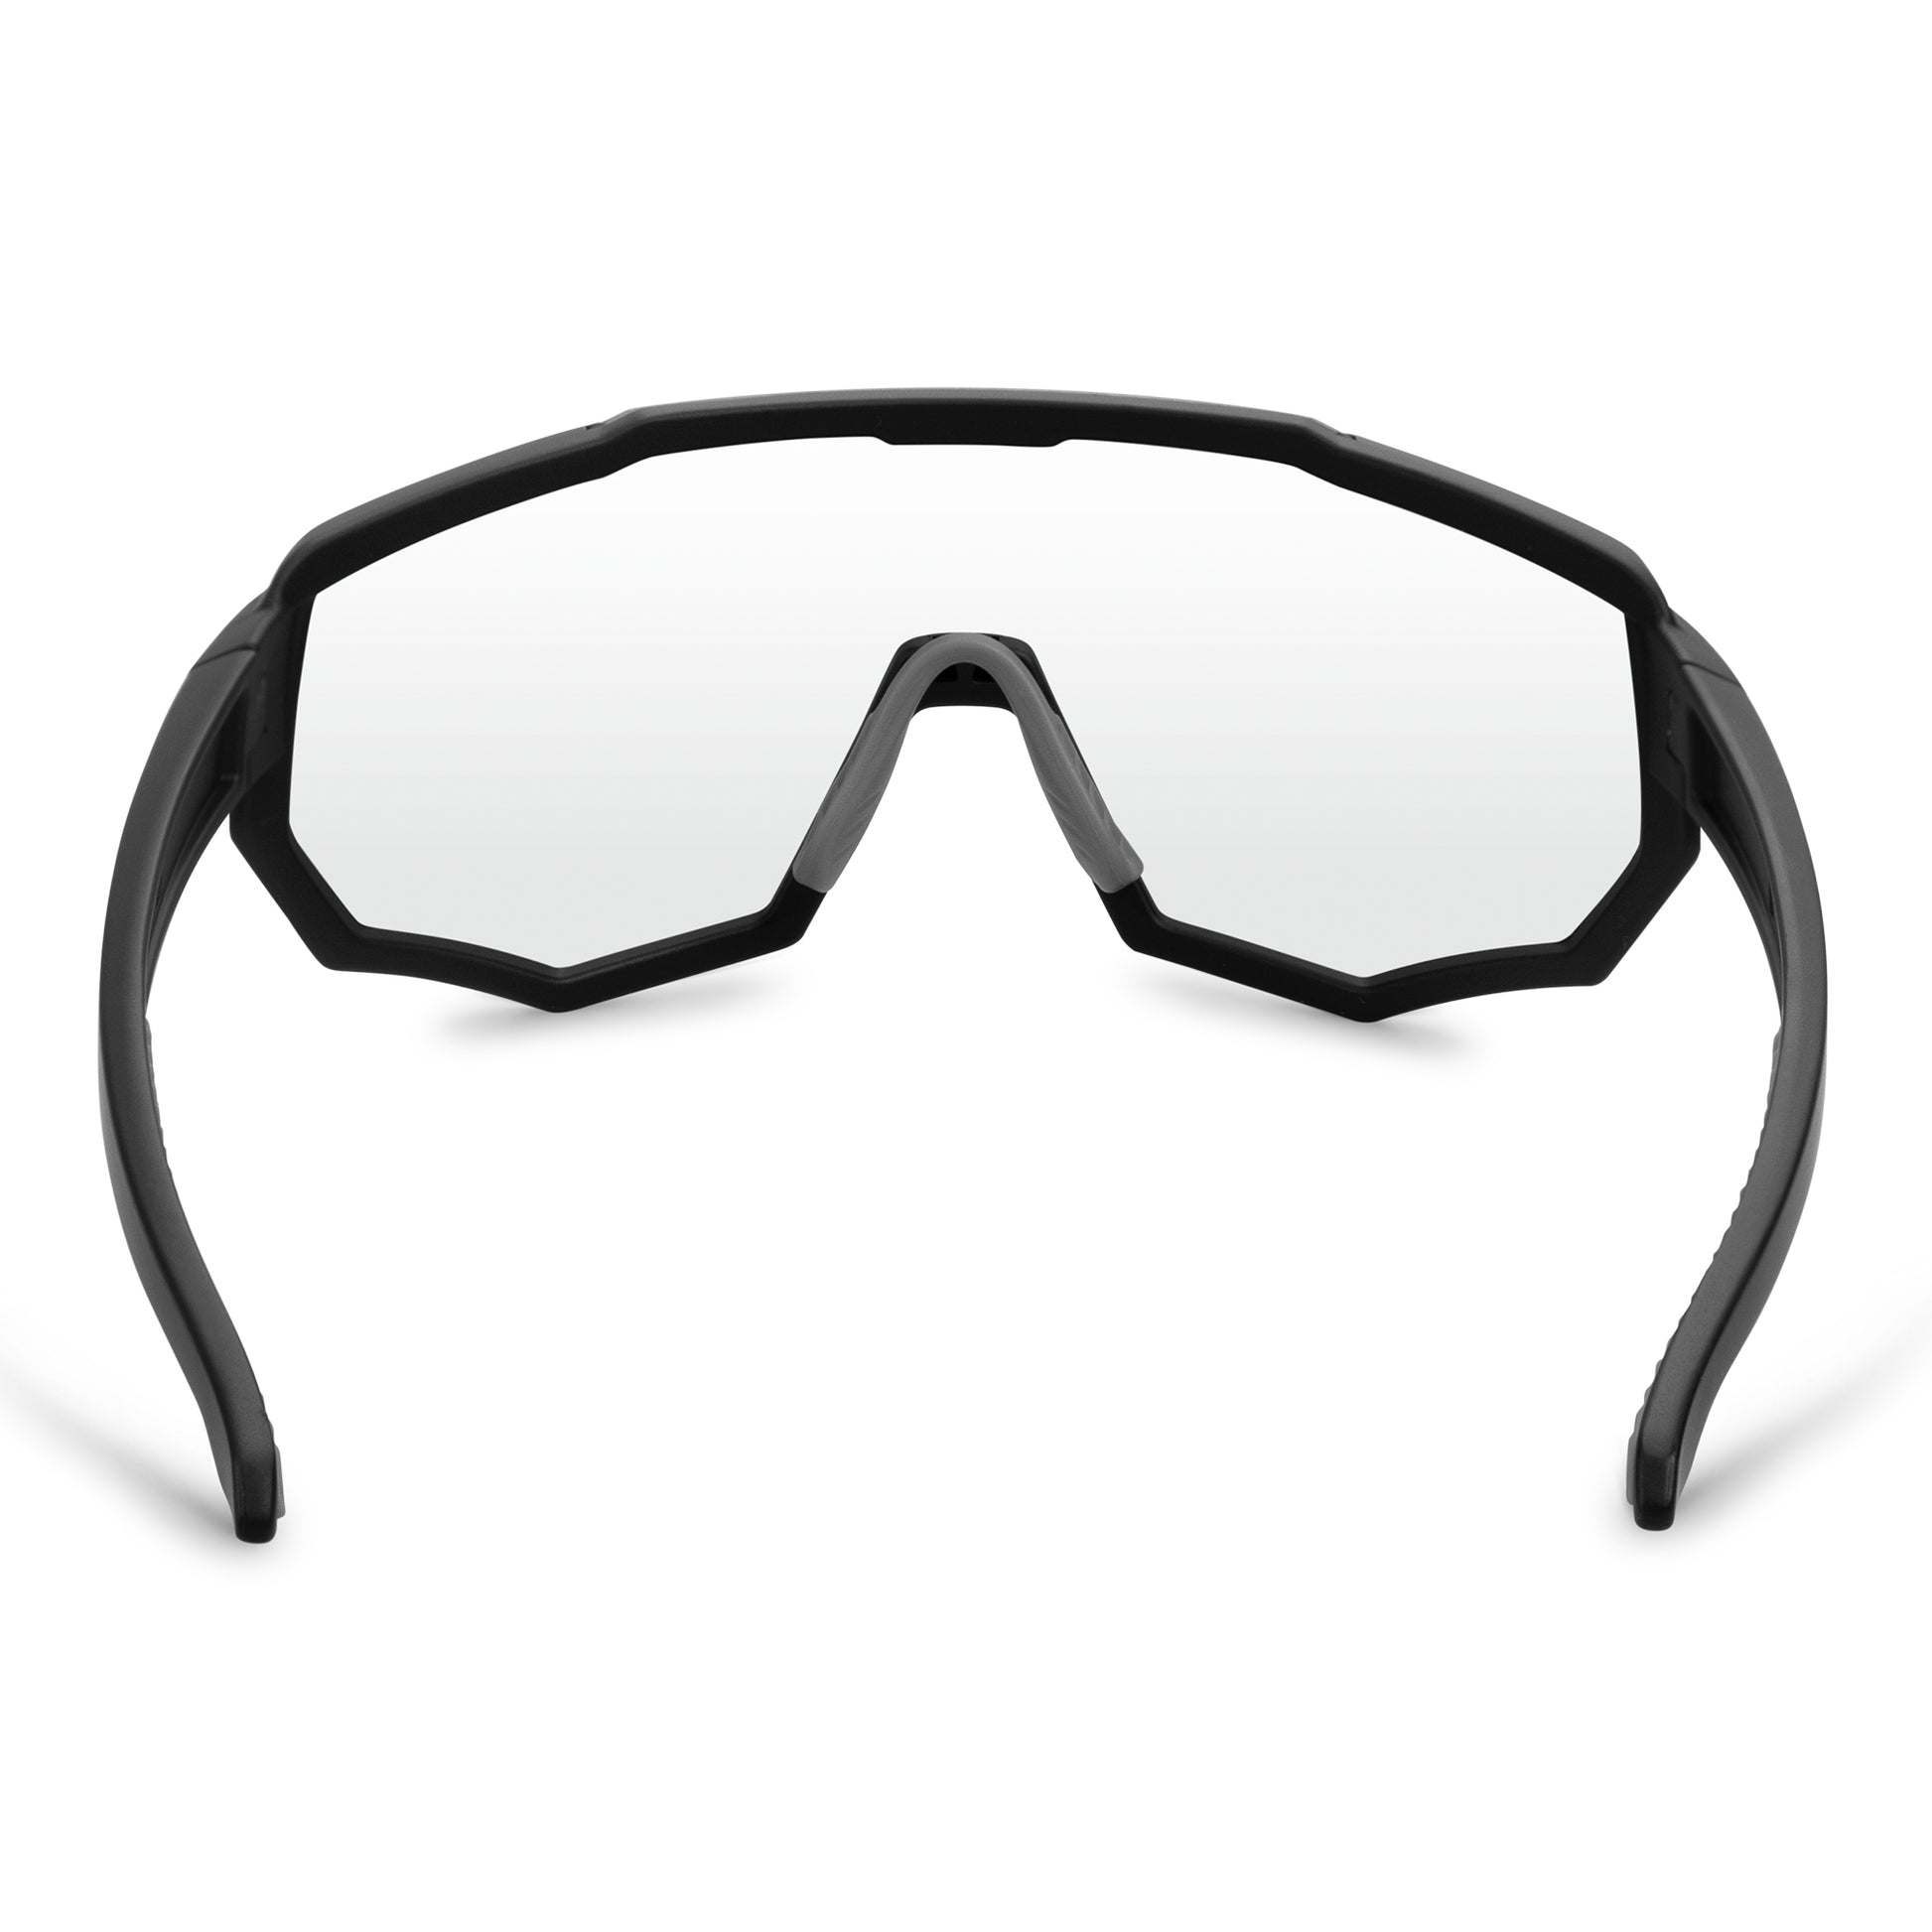 Kanon Photochromic Sunglasses/Cycling/Running + 2 Replacement Lenses